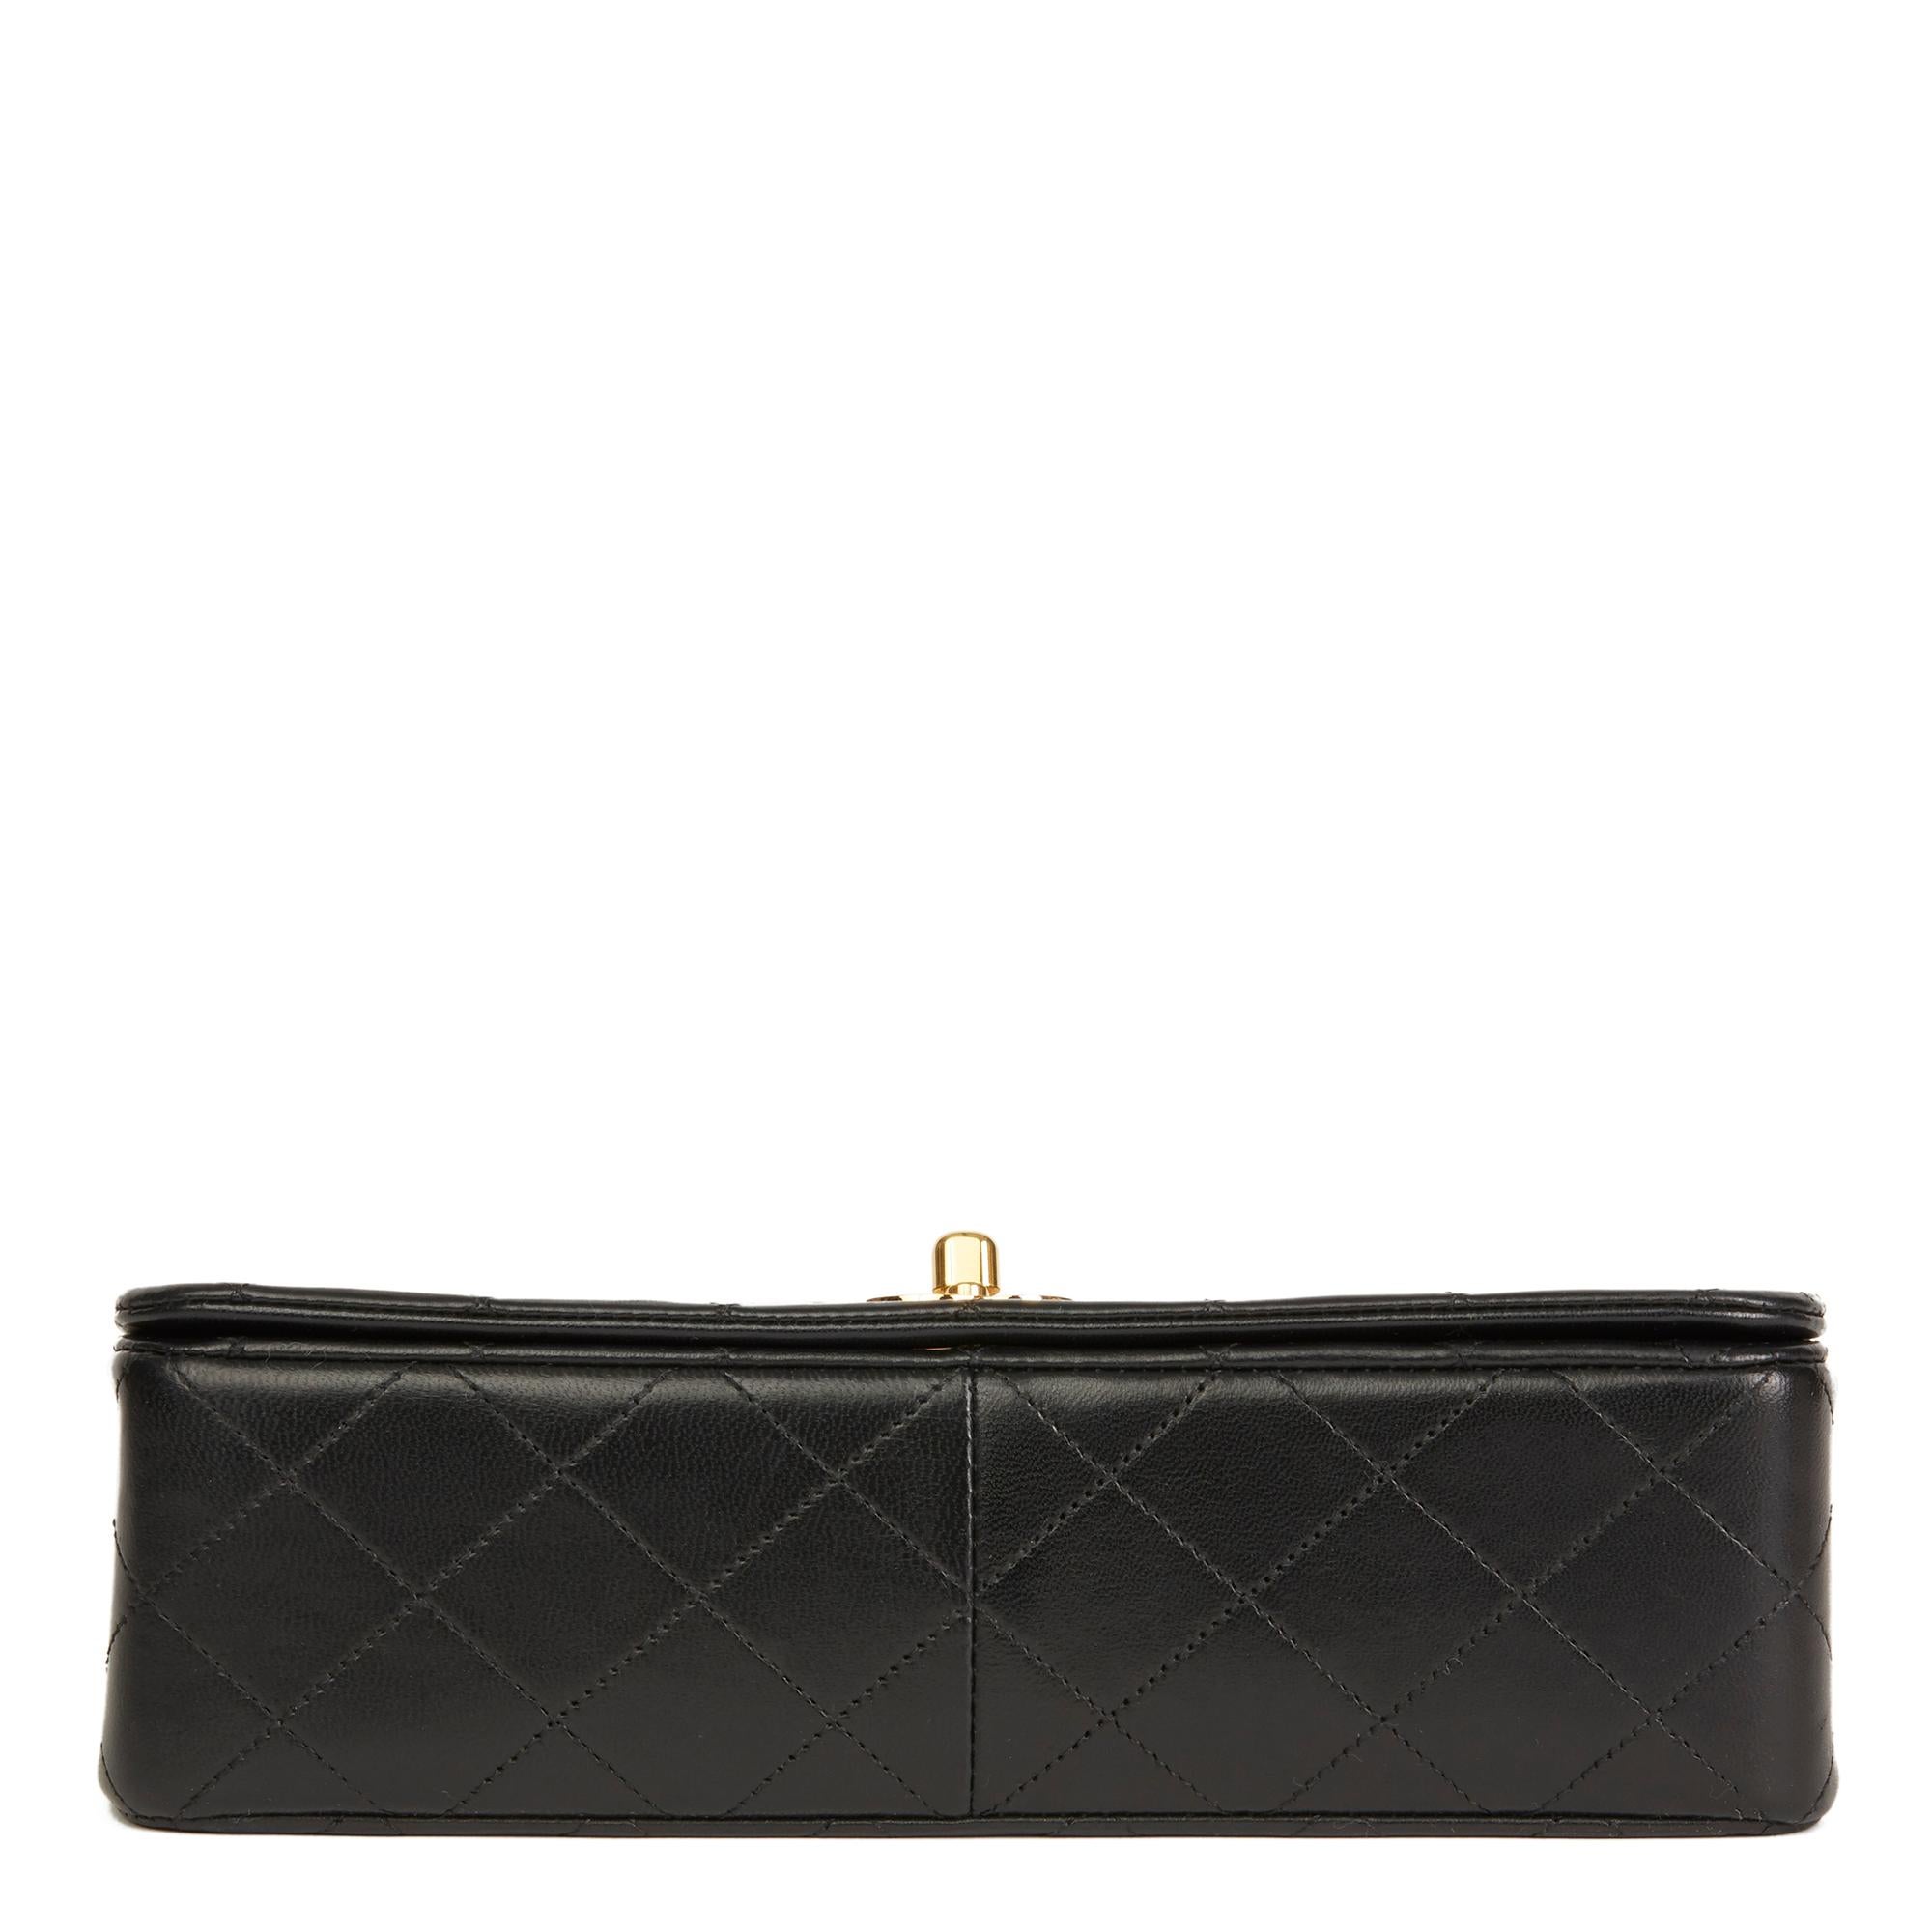 1990 Chanel Black Quilted Lambskin Vintage Small Classic Single Full Flap Bag 1